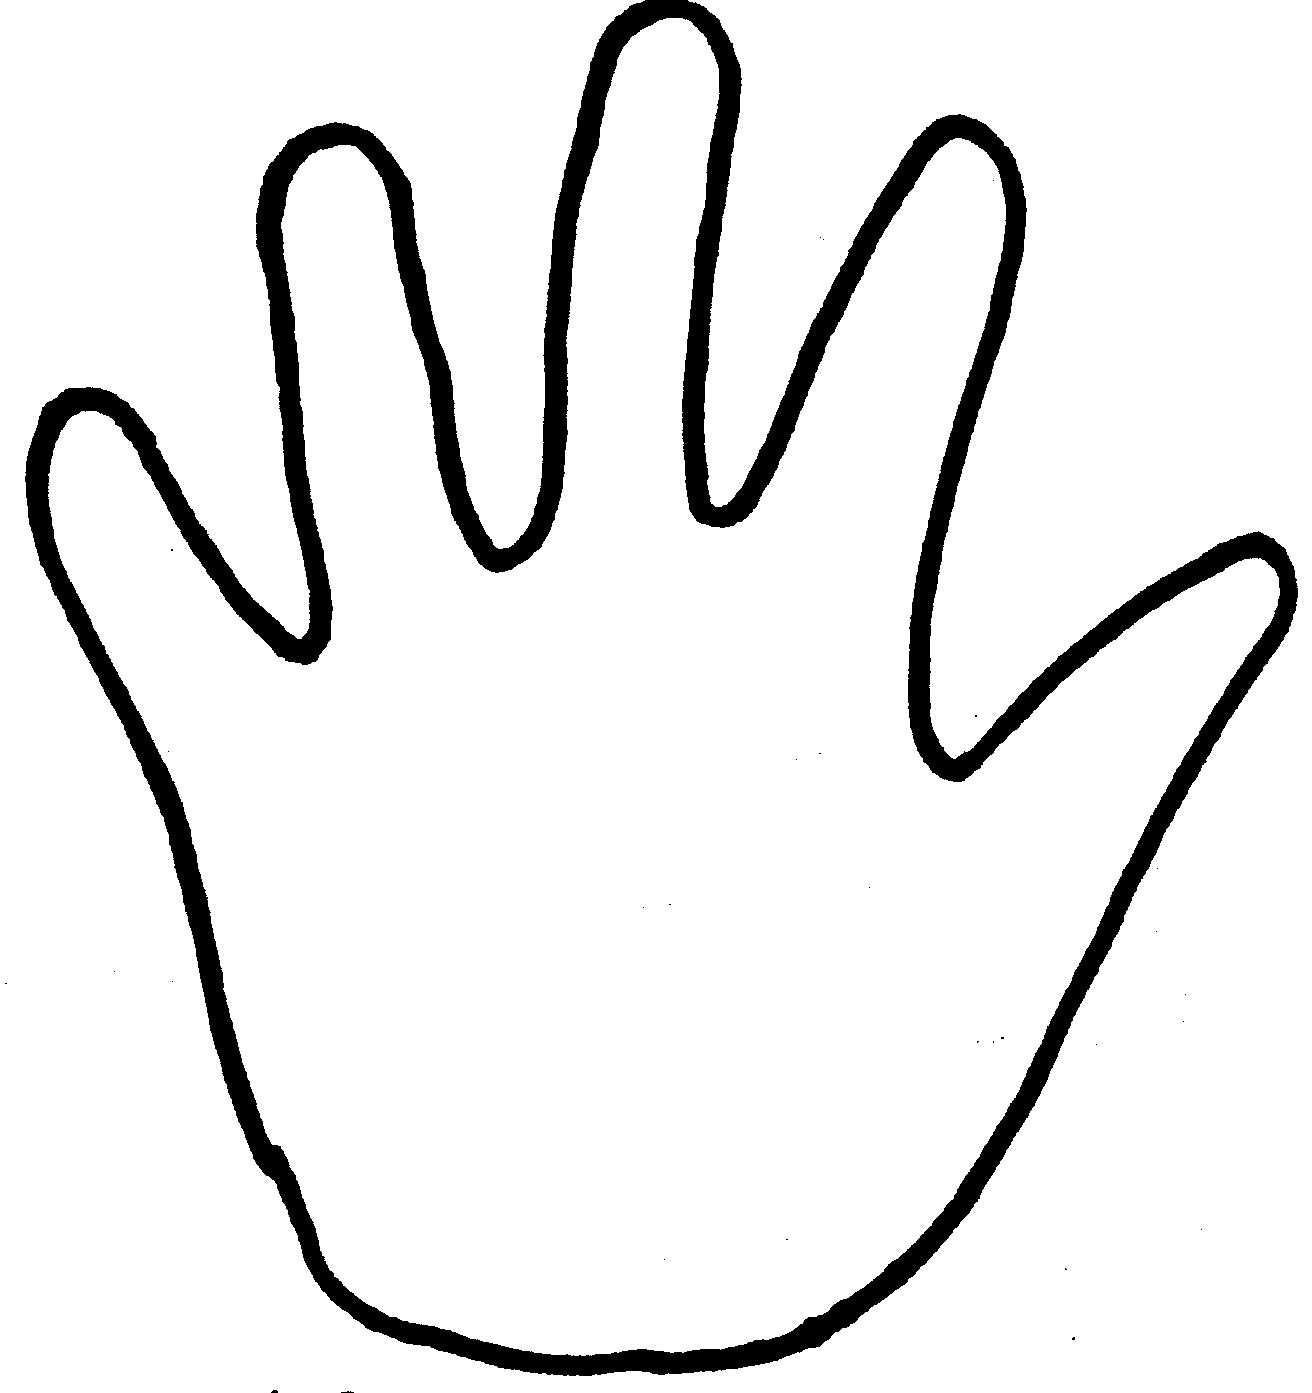 Wash Your Hands Coloring Image - ClipArt Best